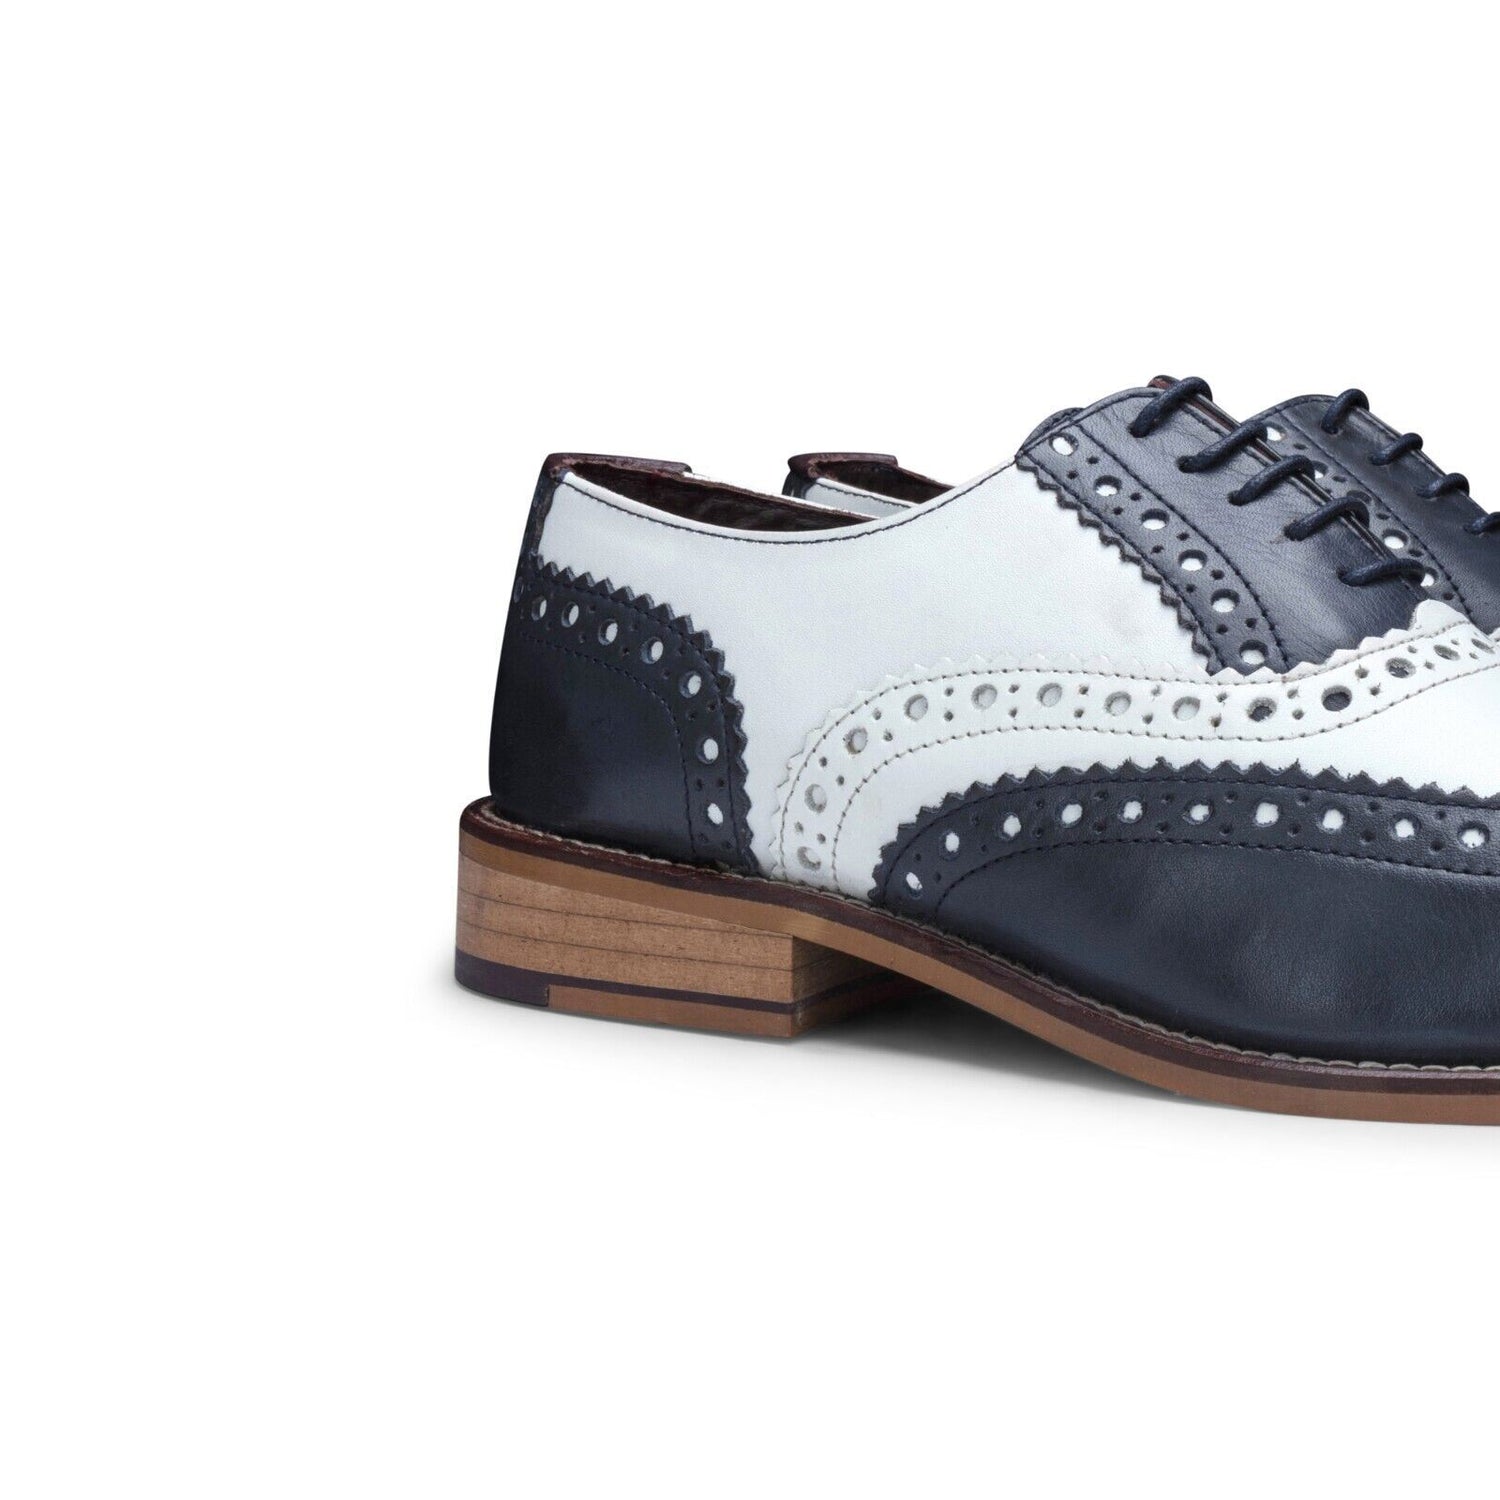 Mens Classic Oxford Navy/White Leather Gatsby Brogue Shoes - Upperclass Fashions 